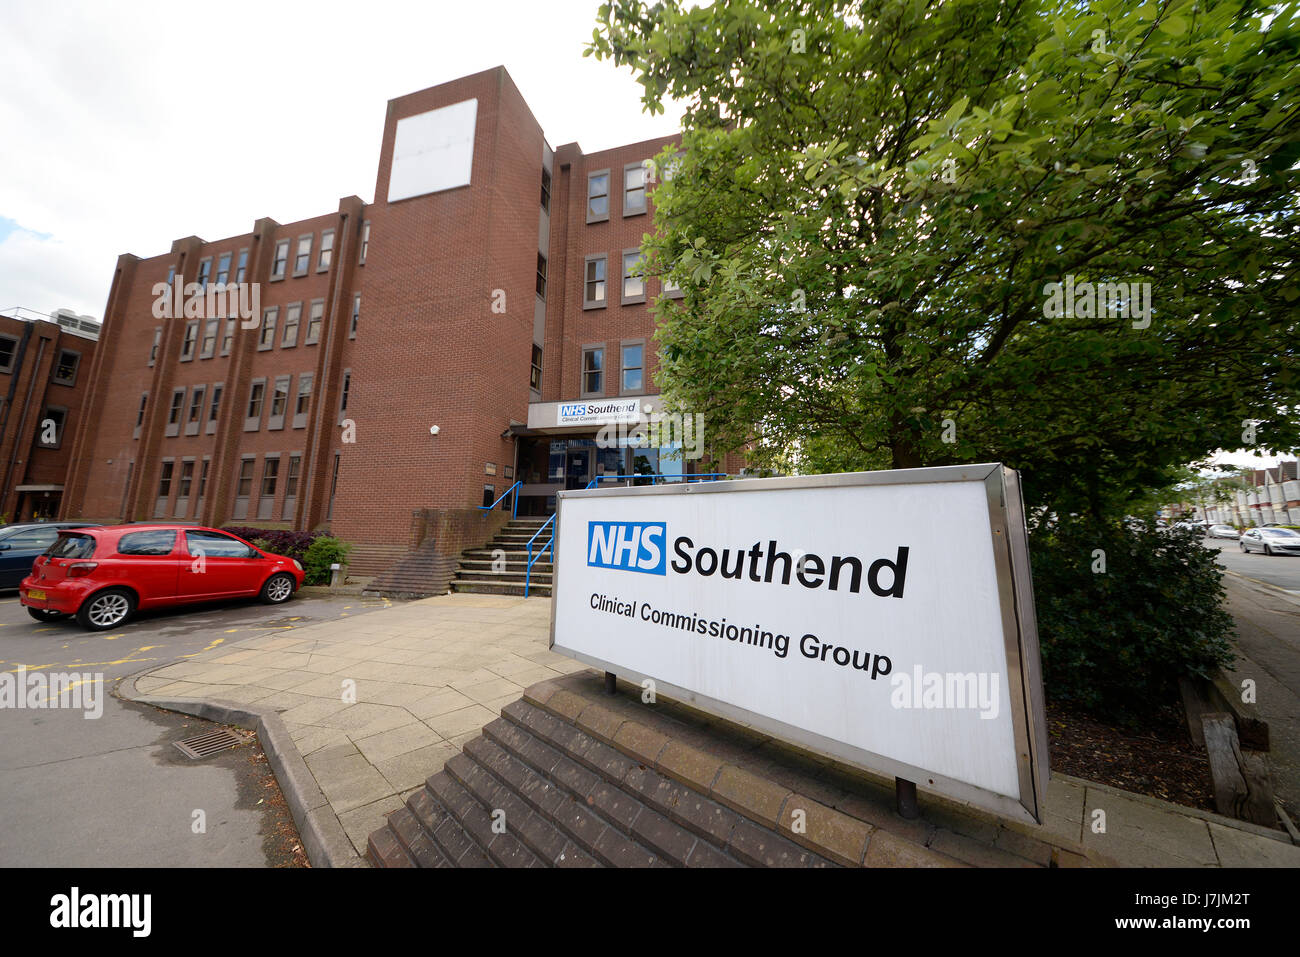 NHS Southend Clinical Commissioning Group building in Southend on Sea, Essex. Space for copy Stock Photo